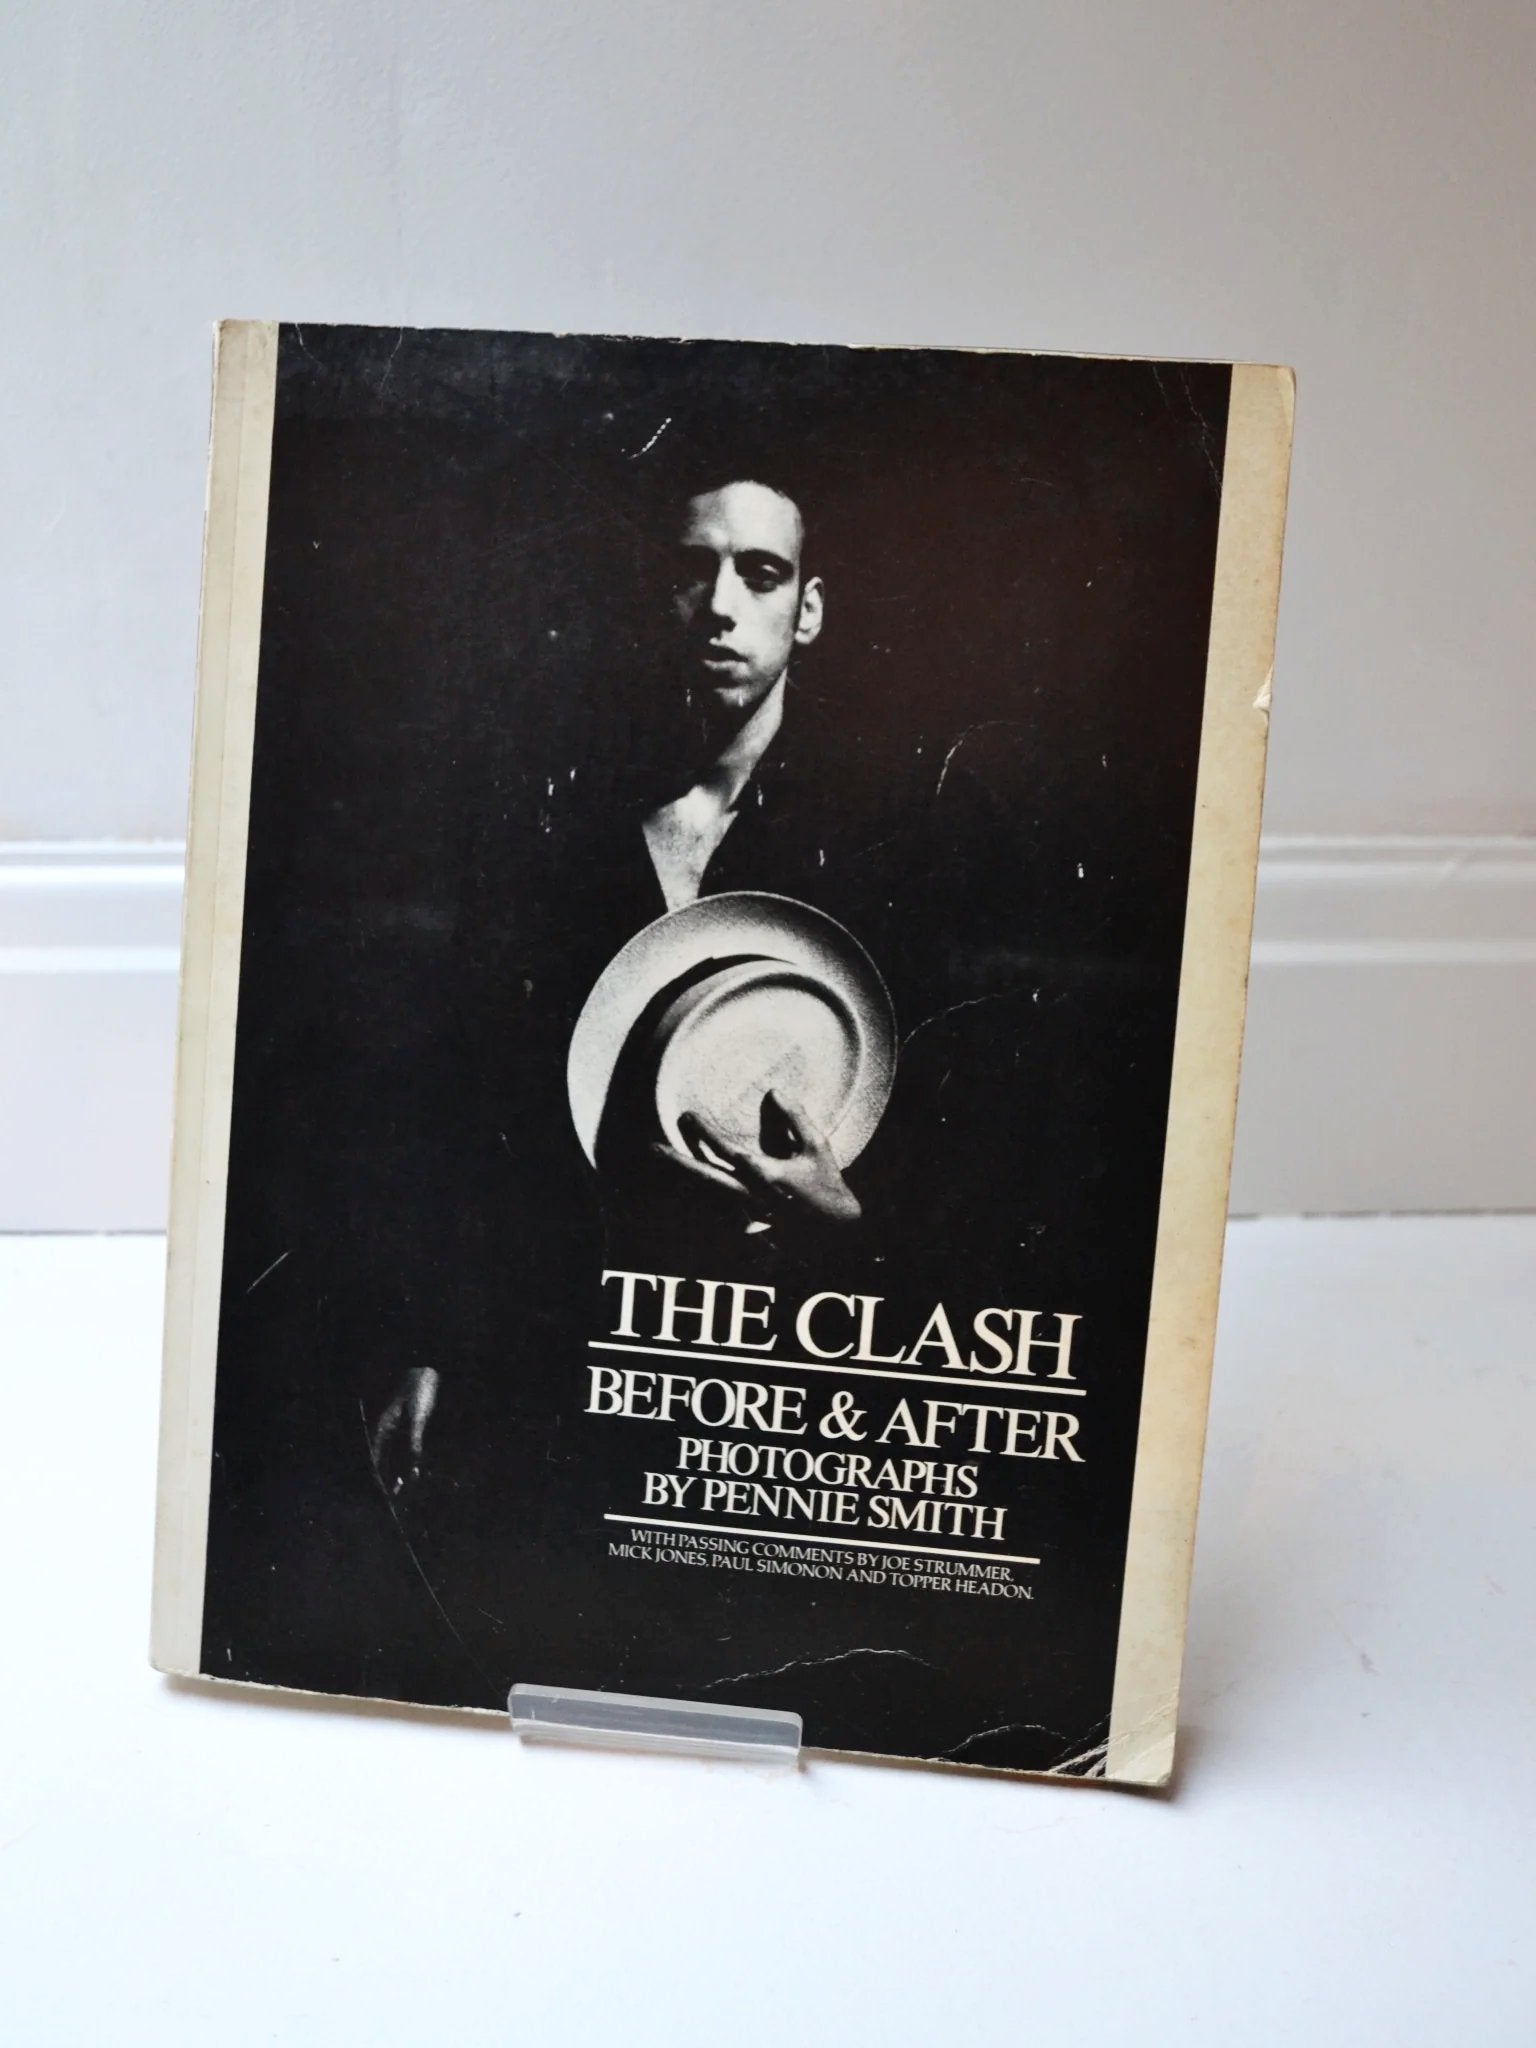 The Clash Before & After: Photographs by Pennie Smith (Eel Pie Publishing / Second reprint, May 1982) 